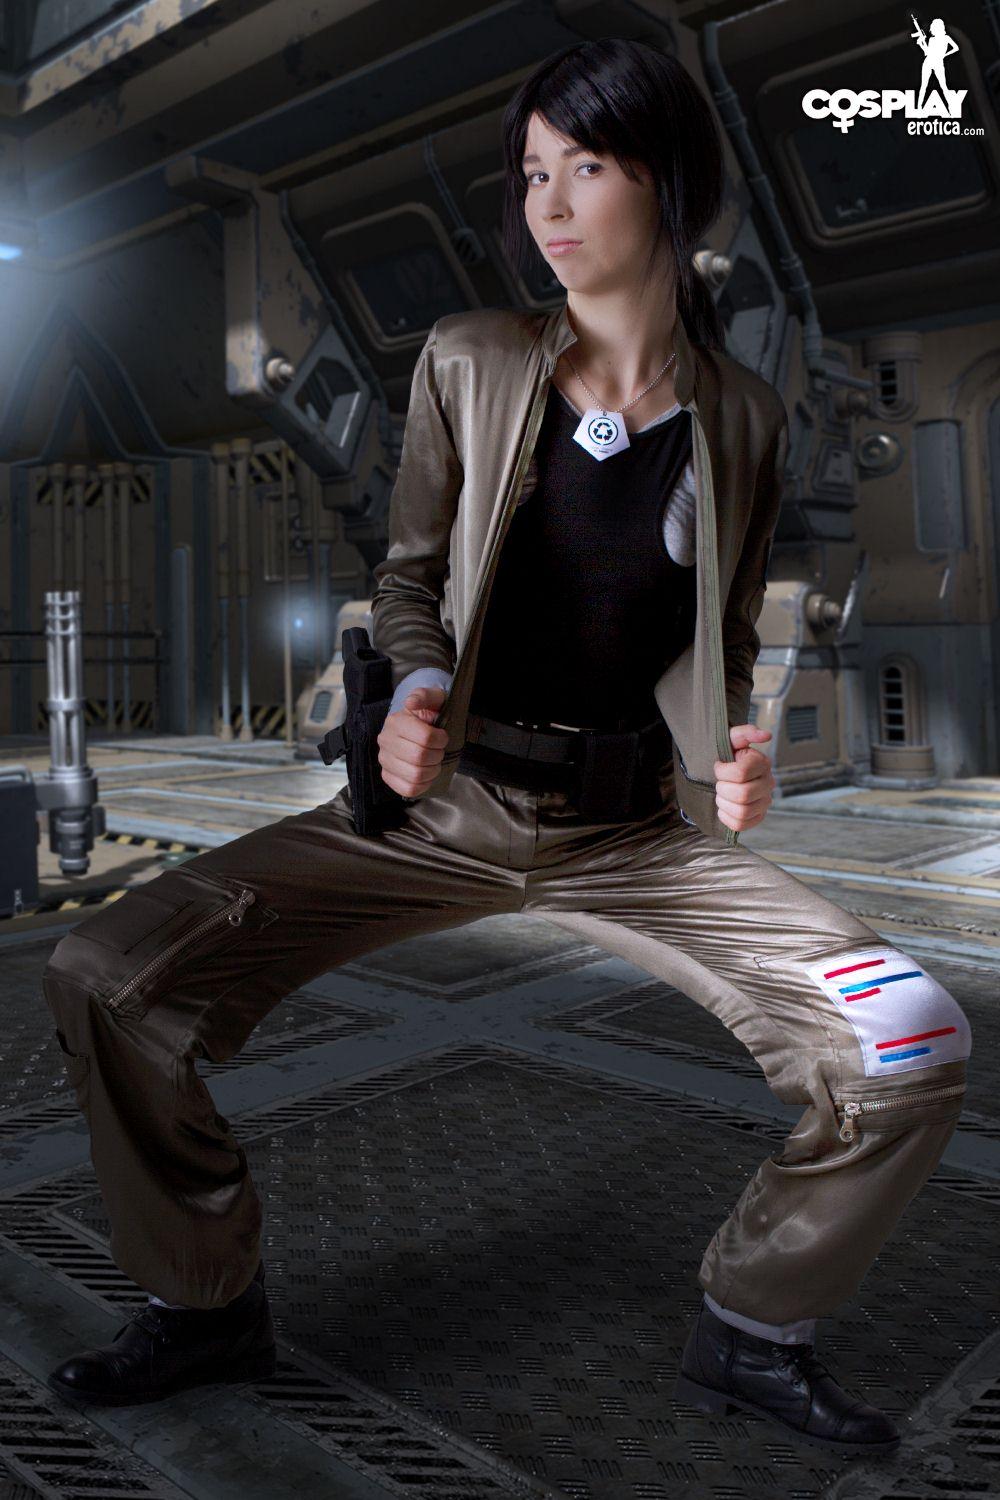 Pictures of hot cosplayer Stacy dressed for duty on Battlestar Galactica #60298249